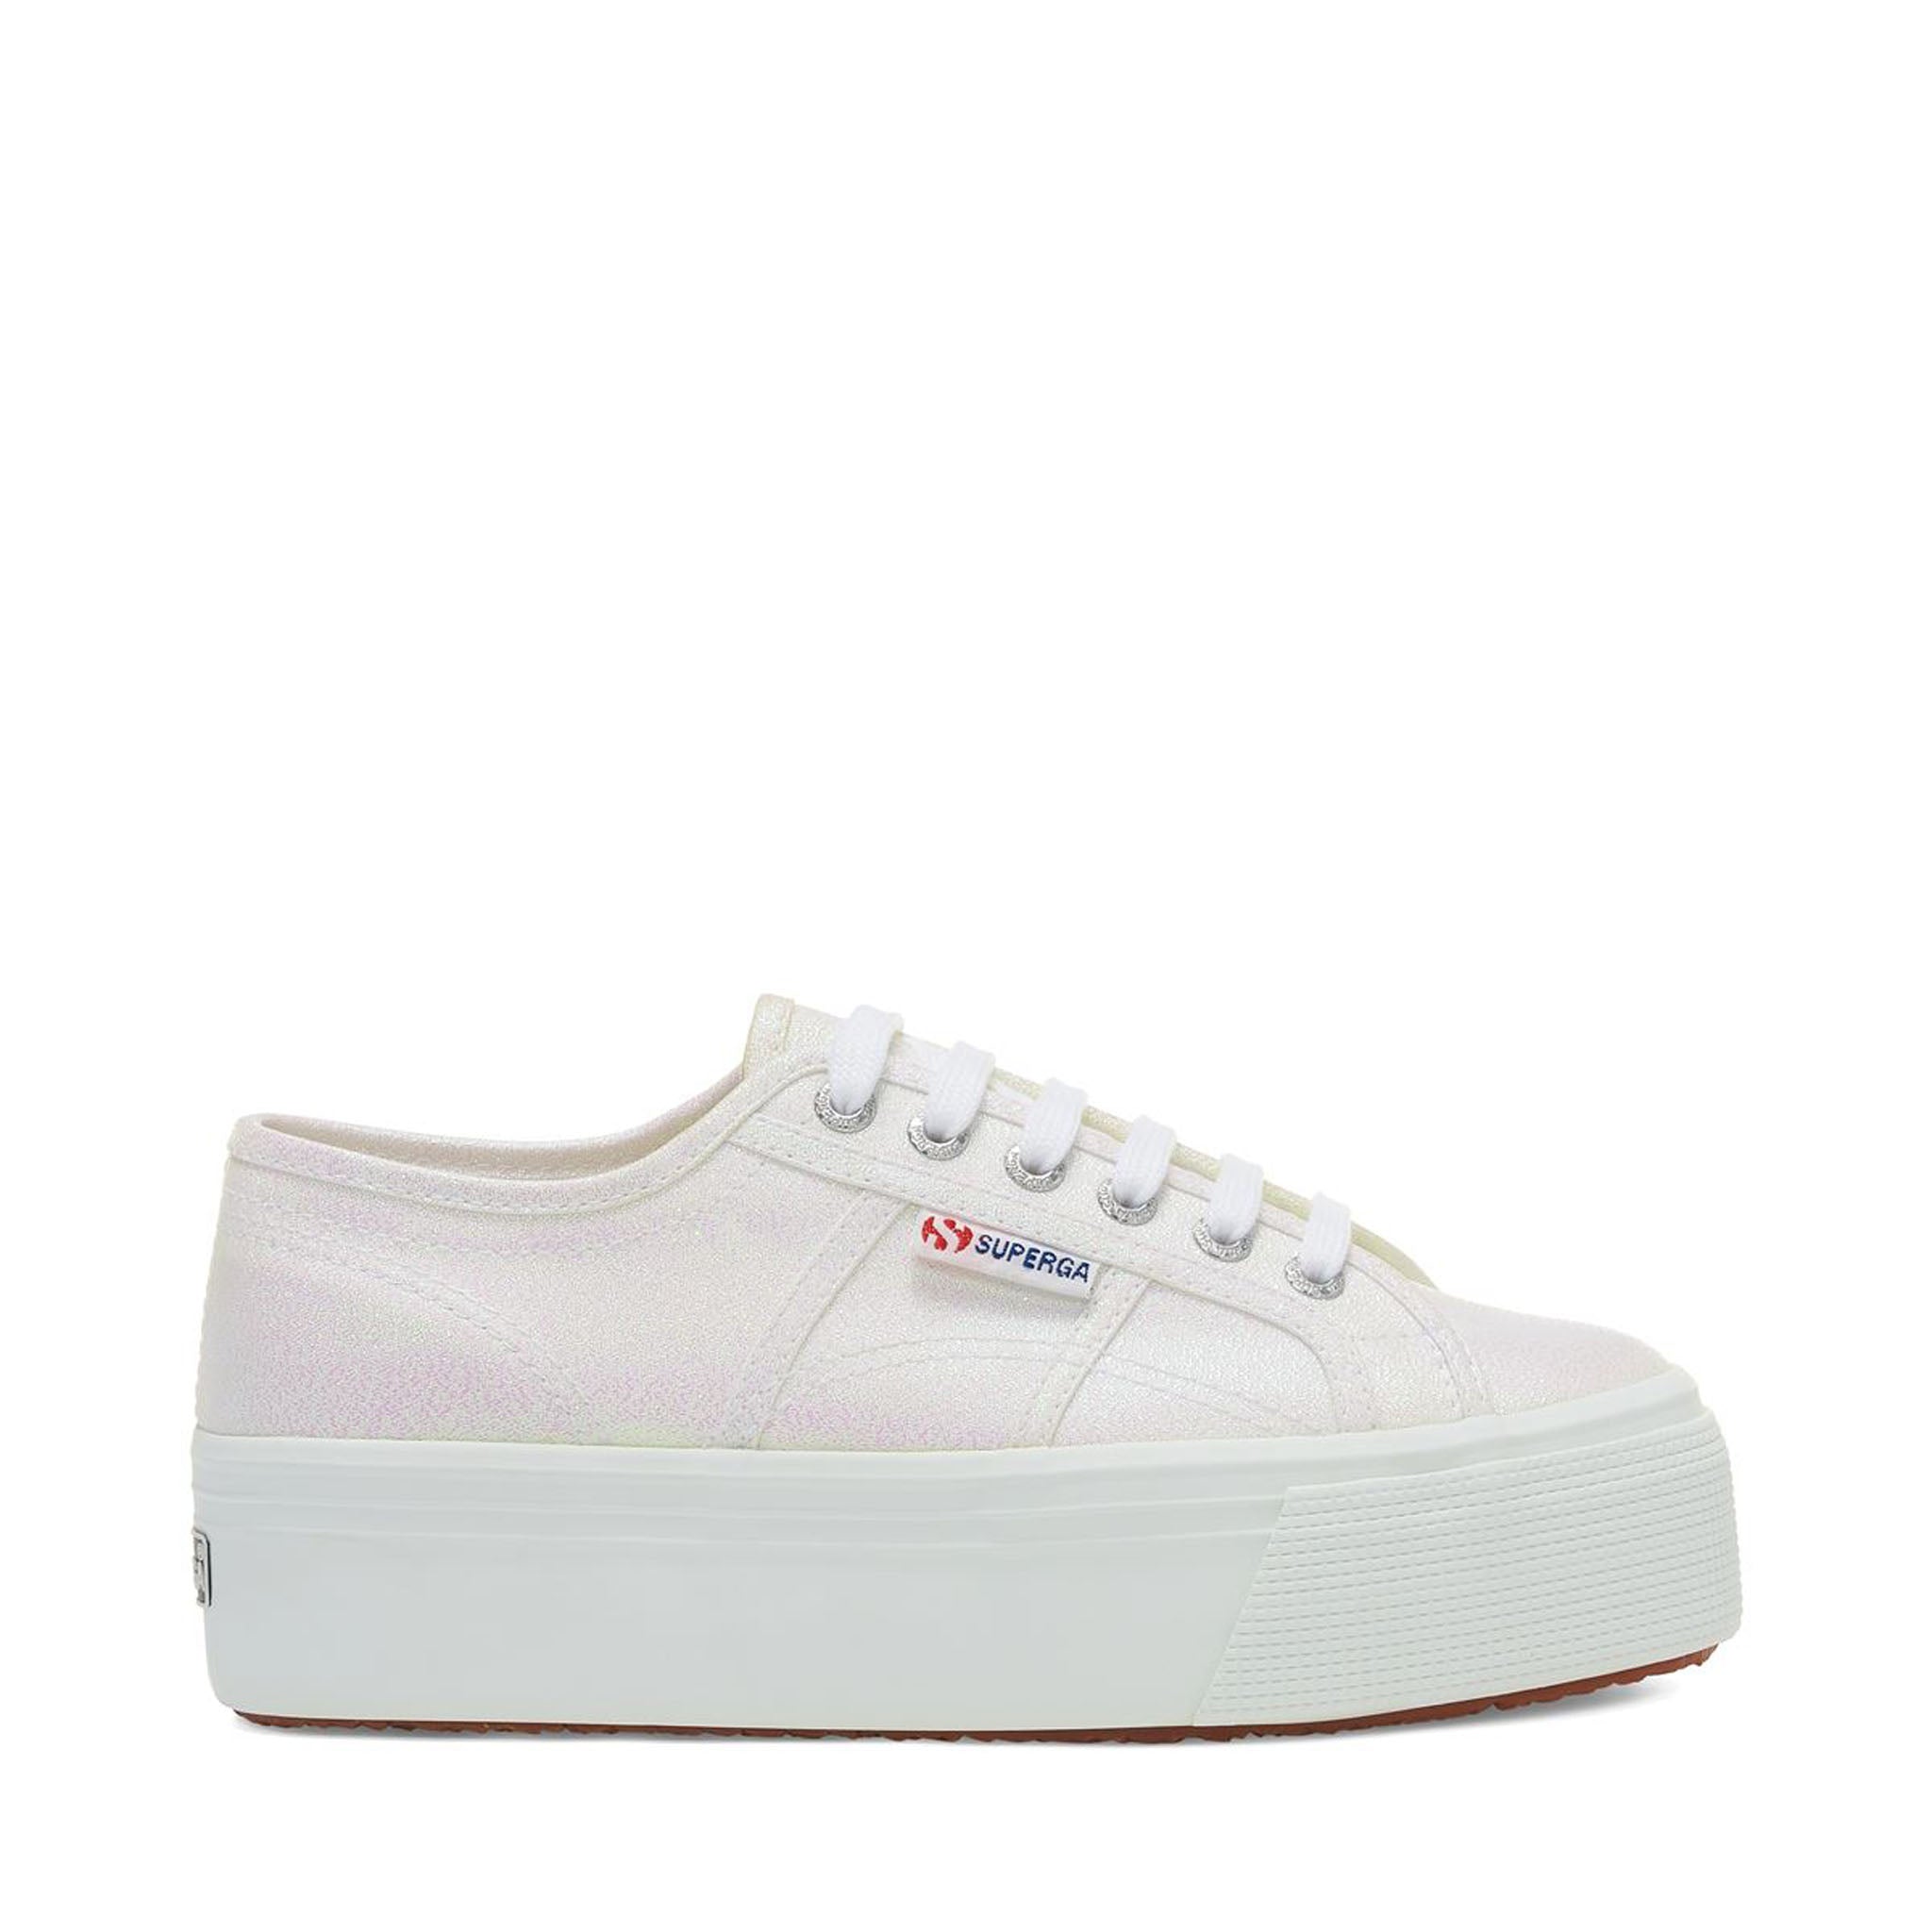 Superga 2790 Lamé Sneakers - Iridescent. Side view.